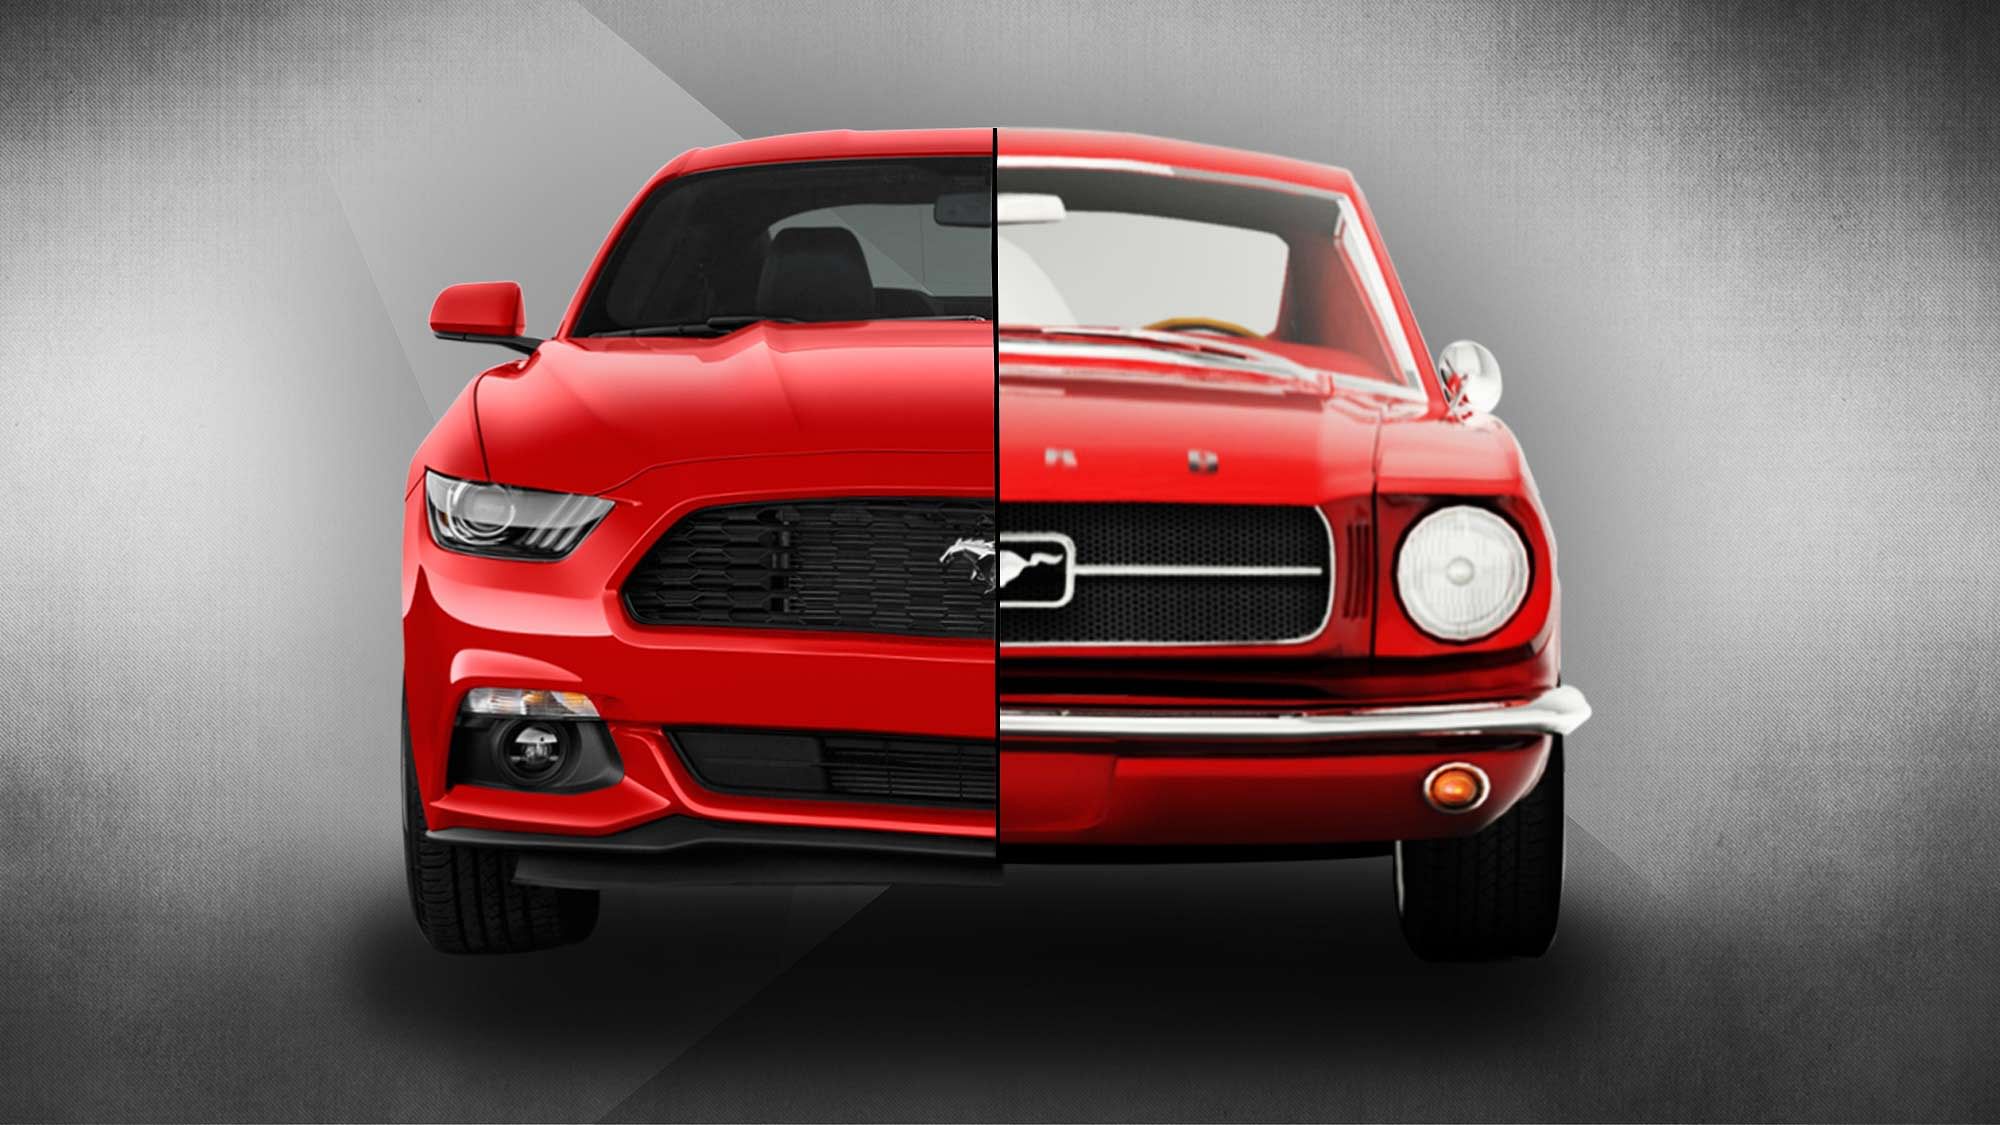 The 2015 Ford Mustang on the left and the 1964 Mustang on the right. (Photo: <b>The Quint</b>)